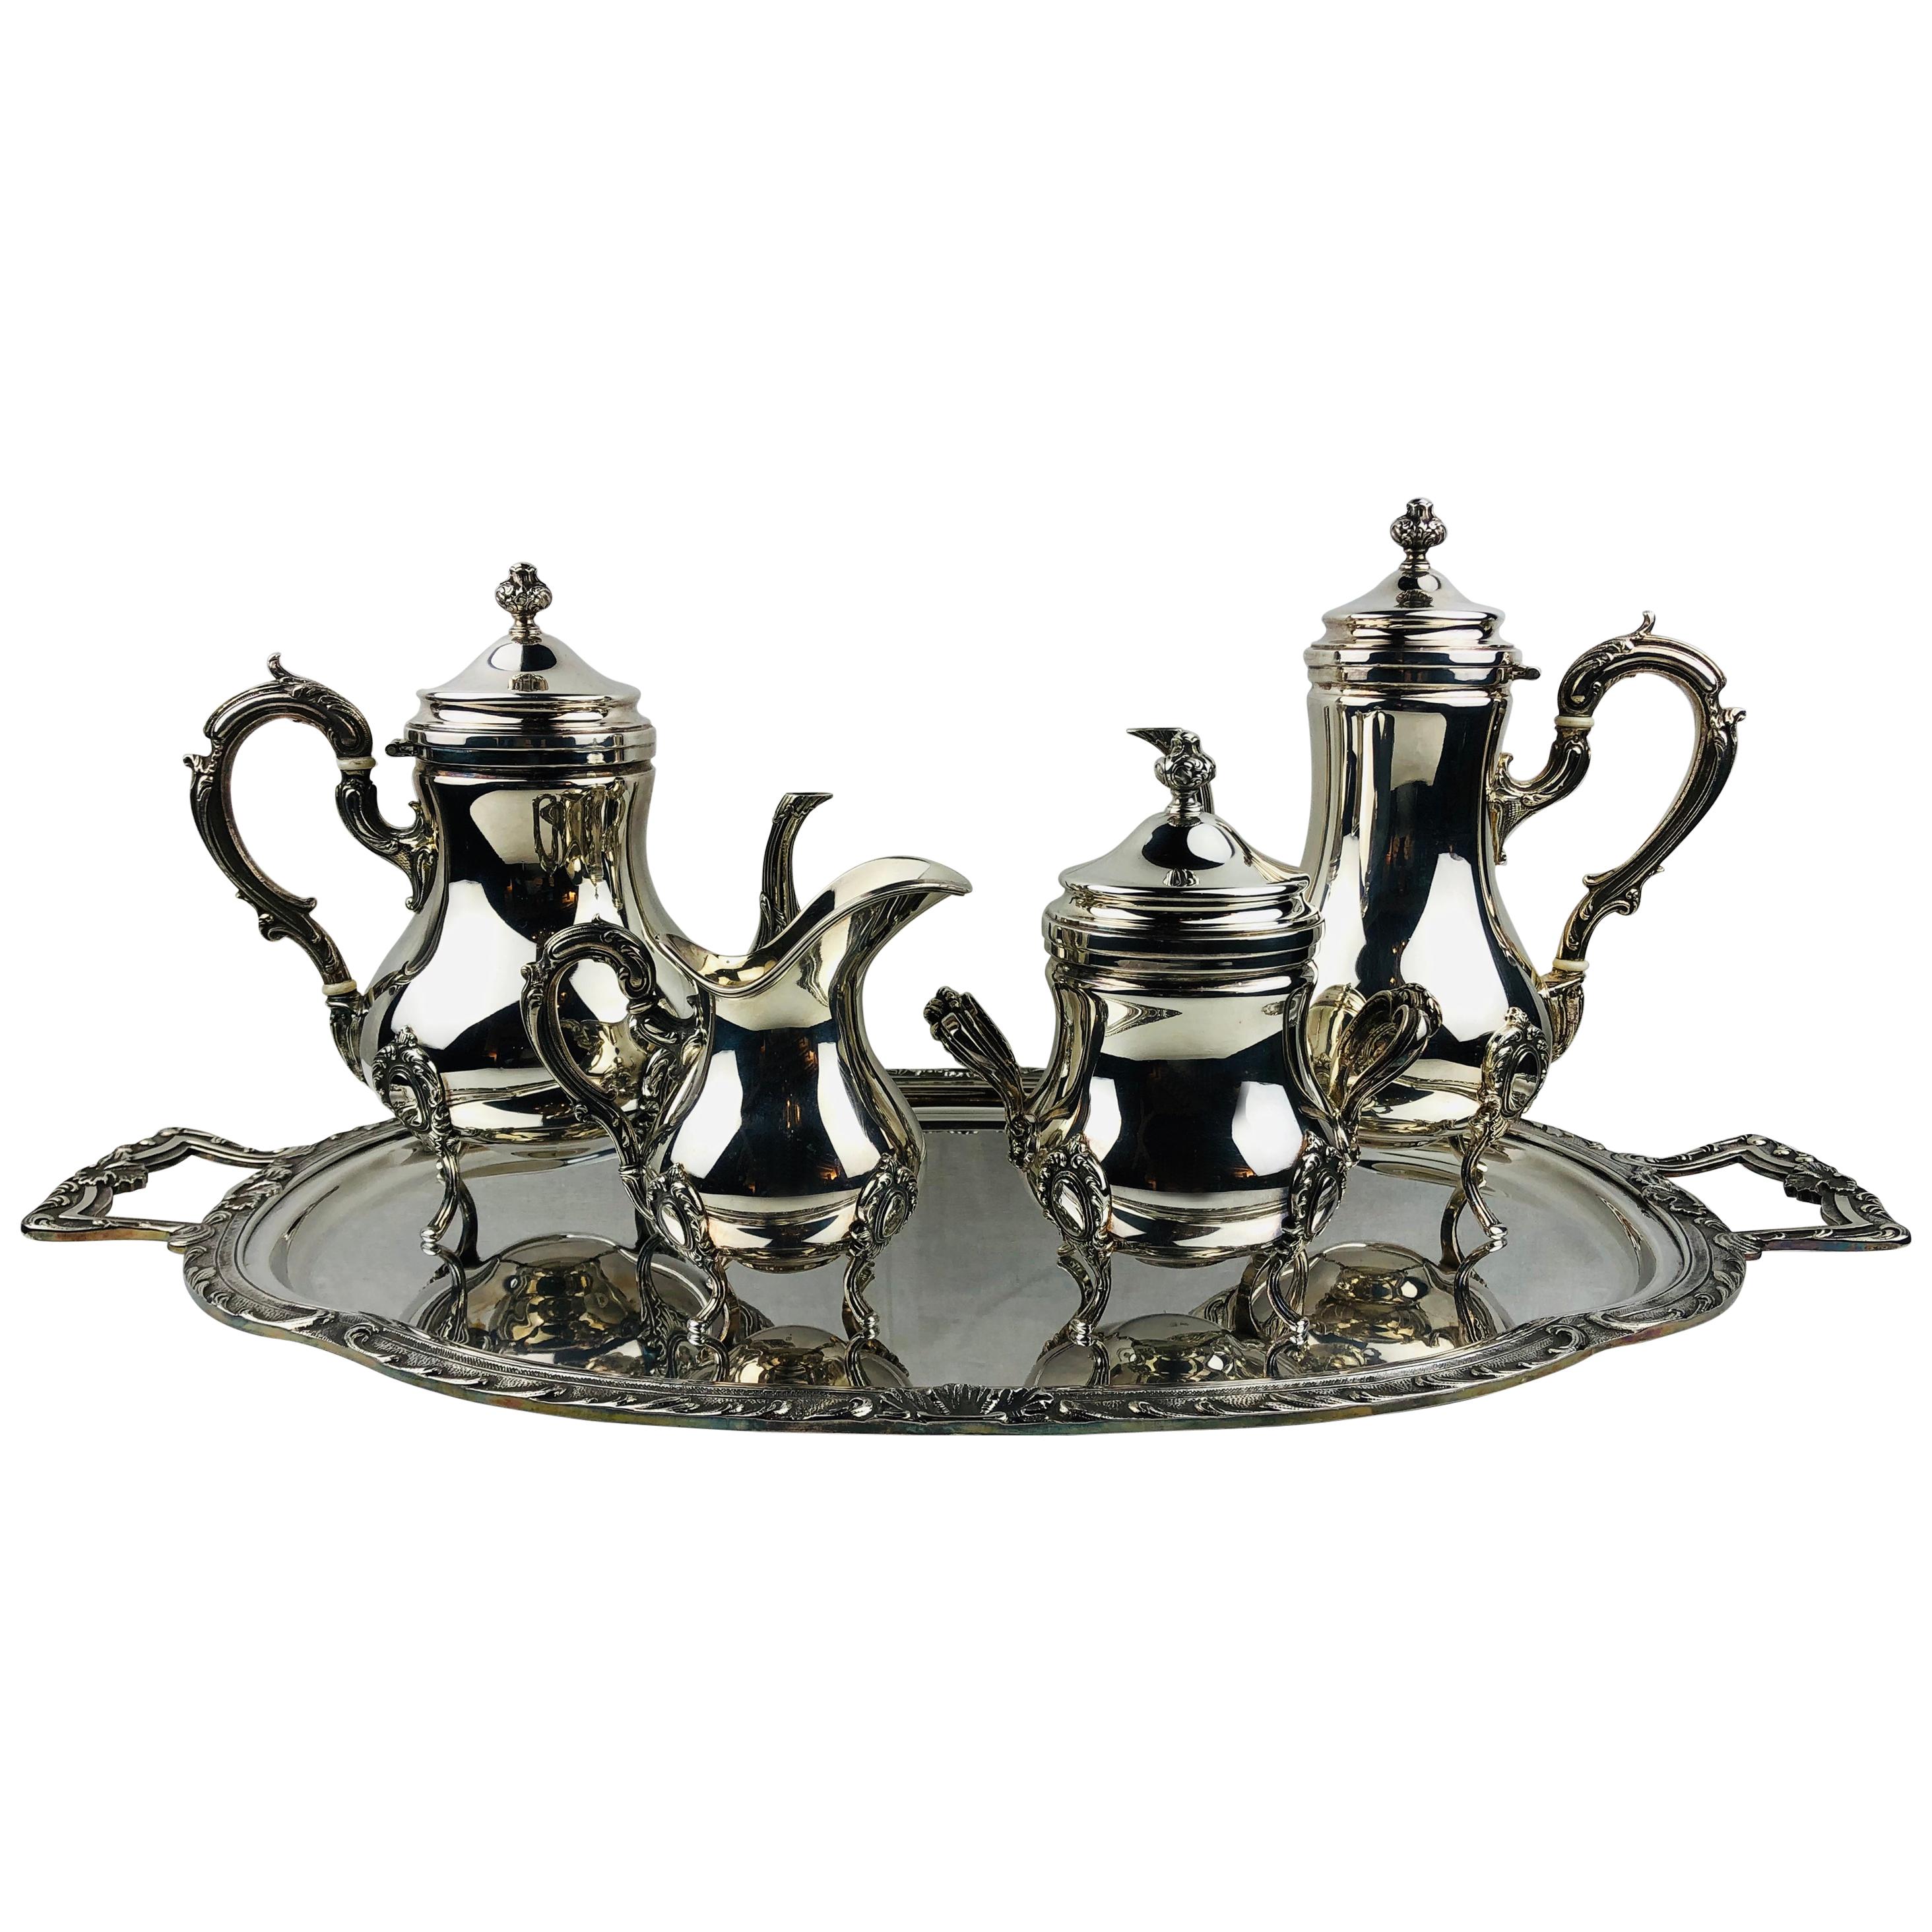 20th Century Five-Piece Silver Plate Tea and Coffee Service